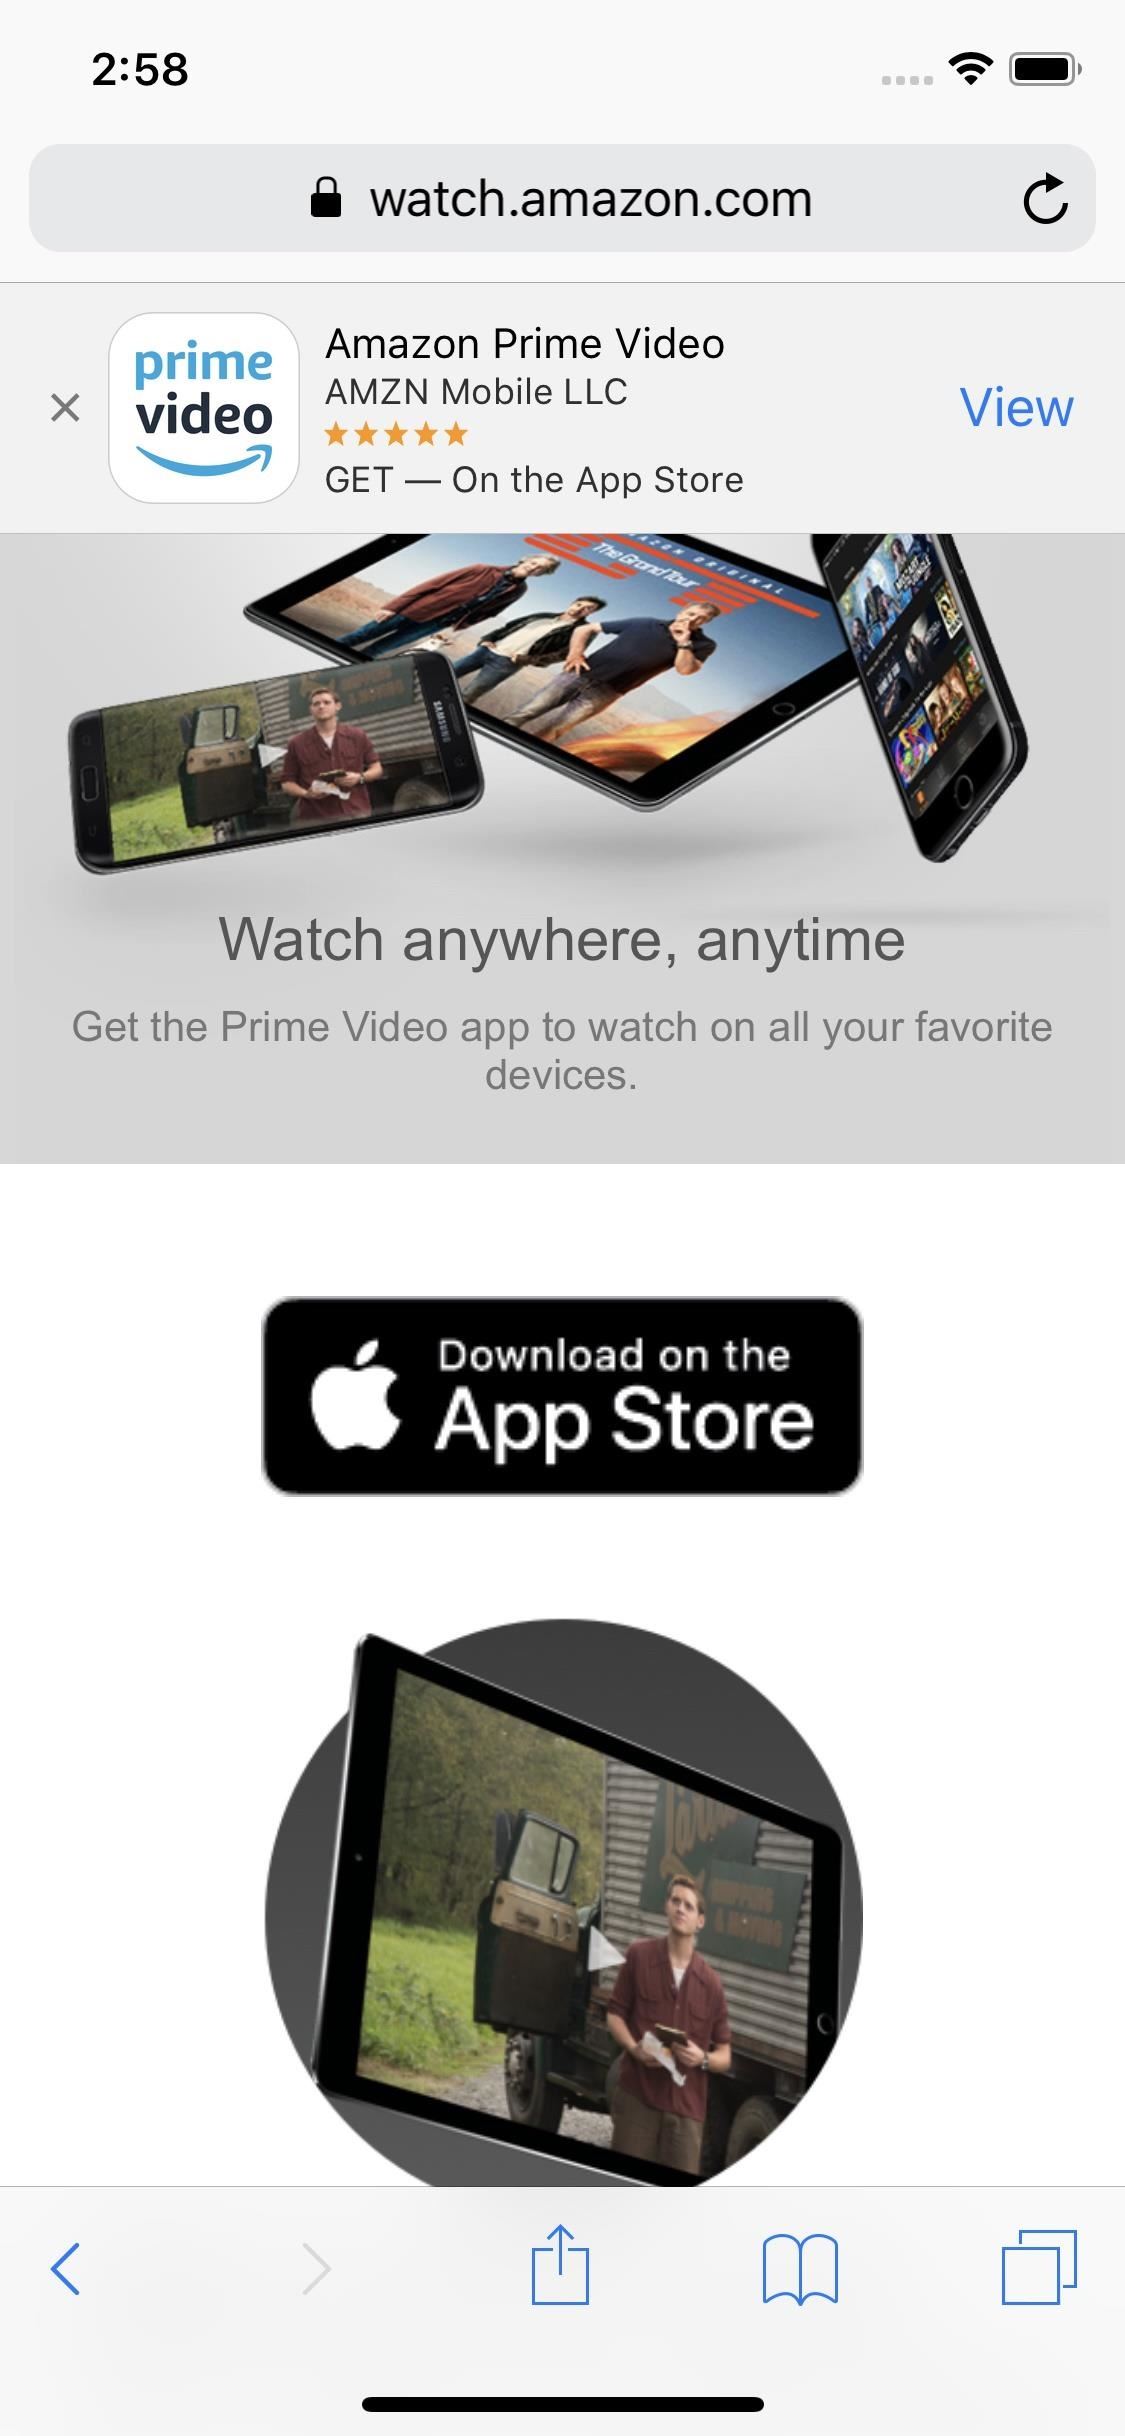 How to Buy Movies & TV Shows from Amazon Prime Video on Your iPhone